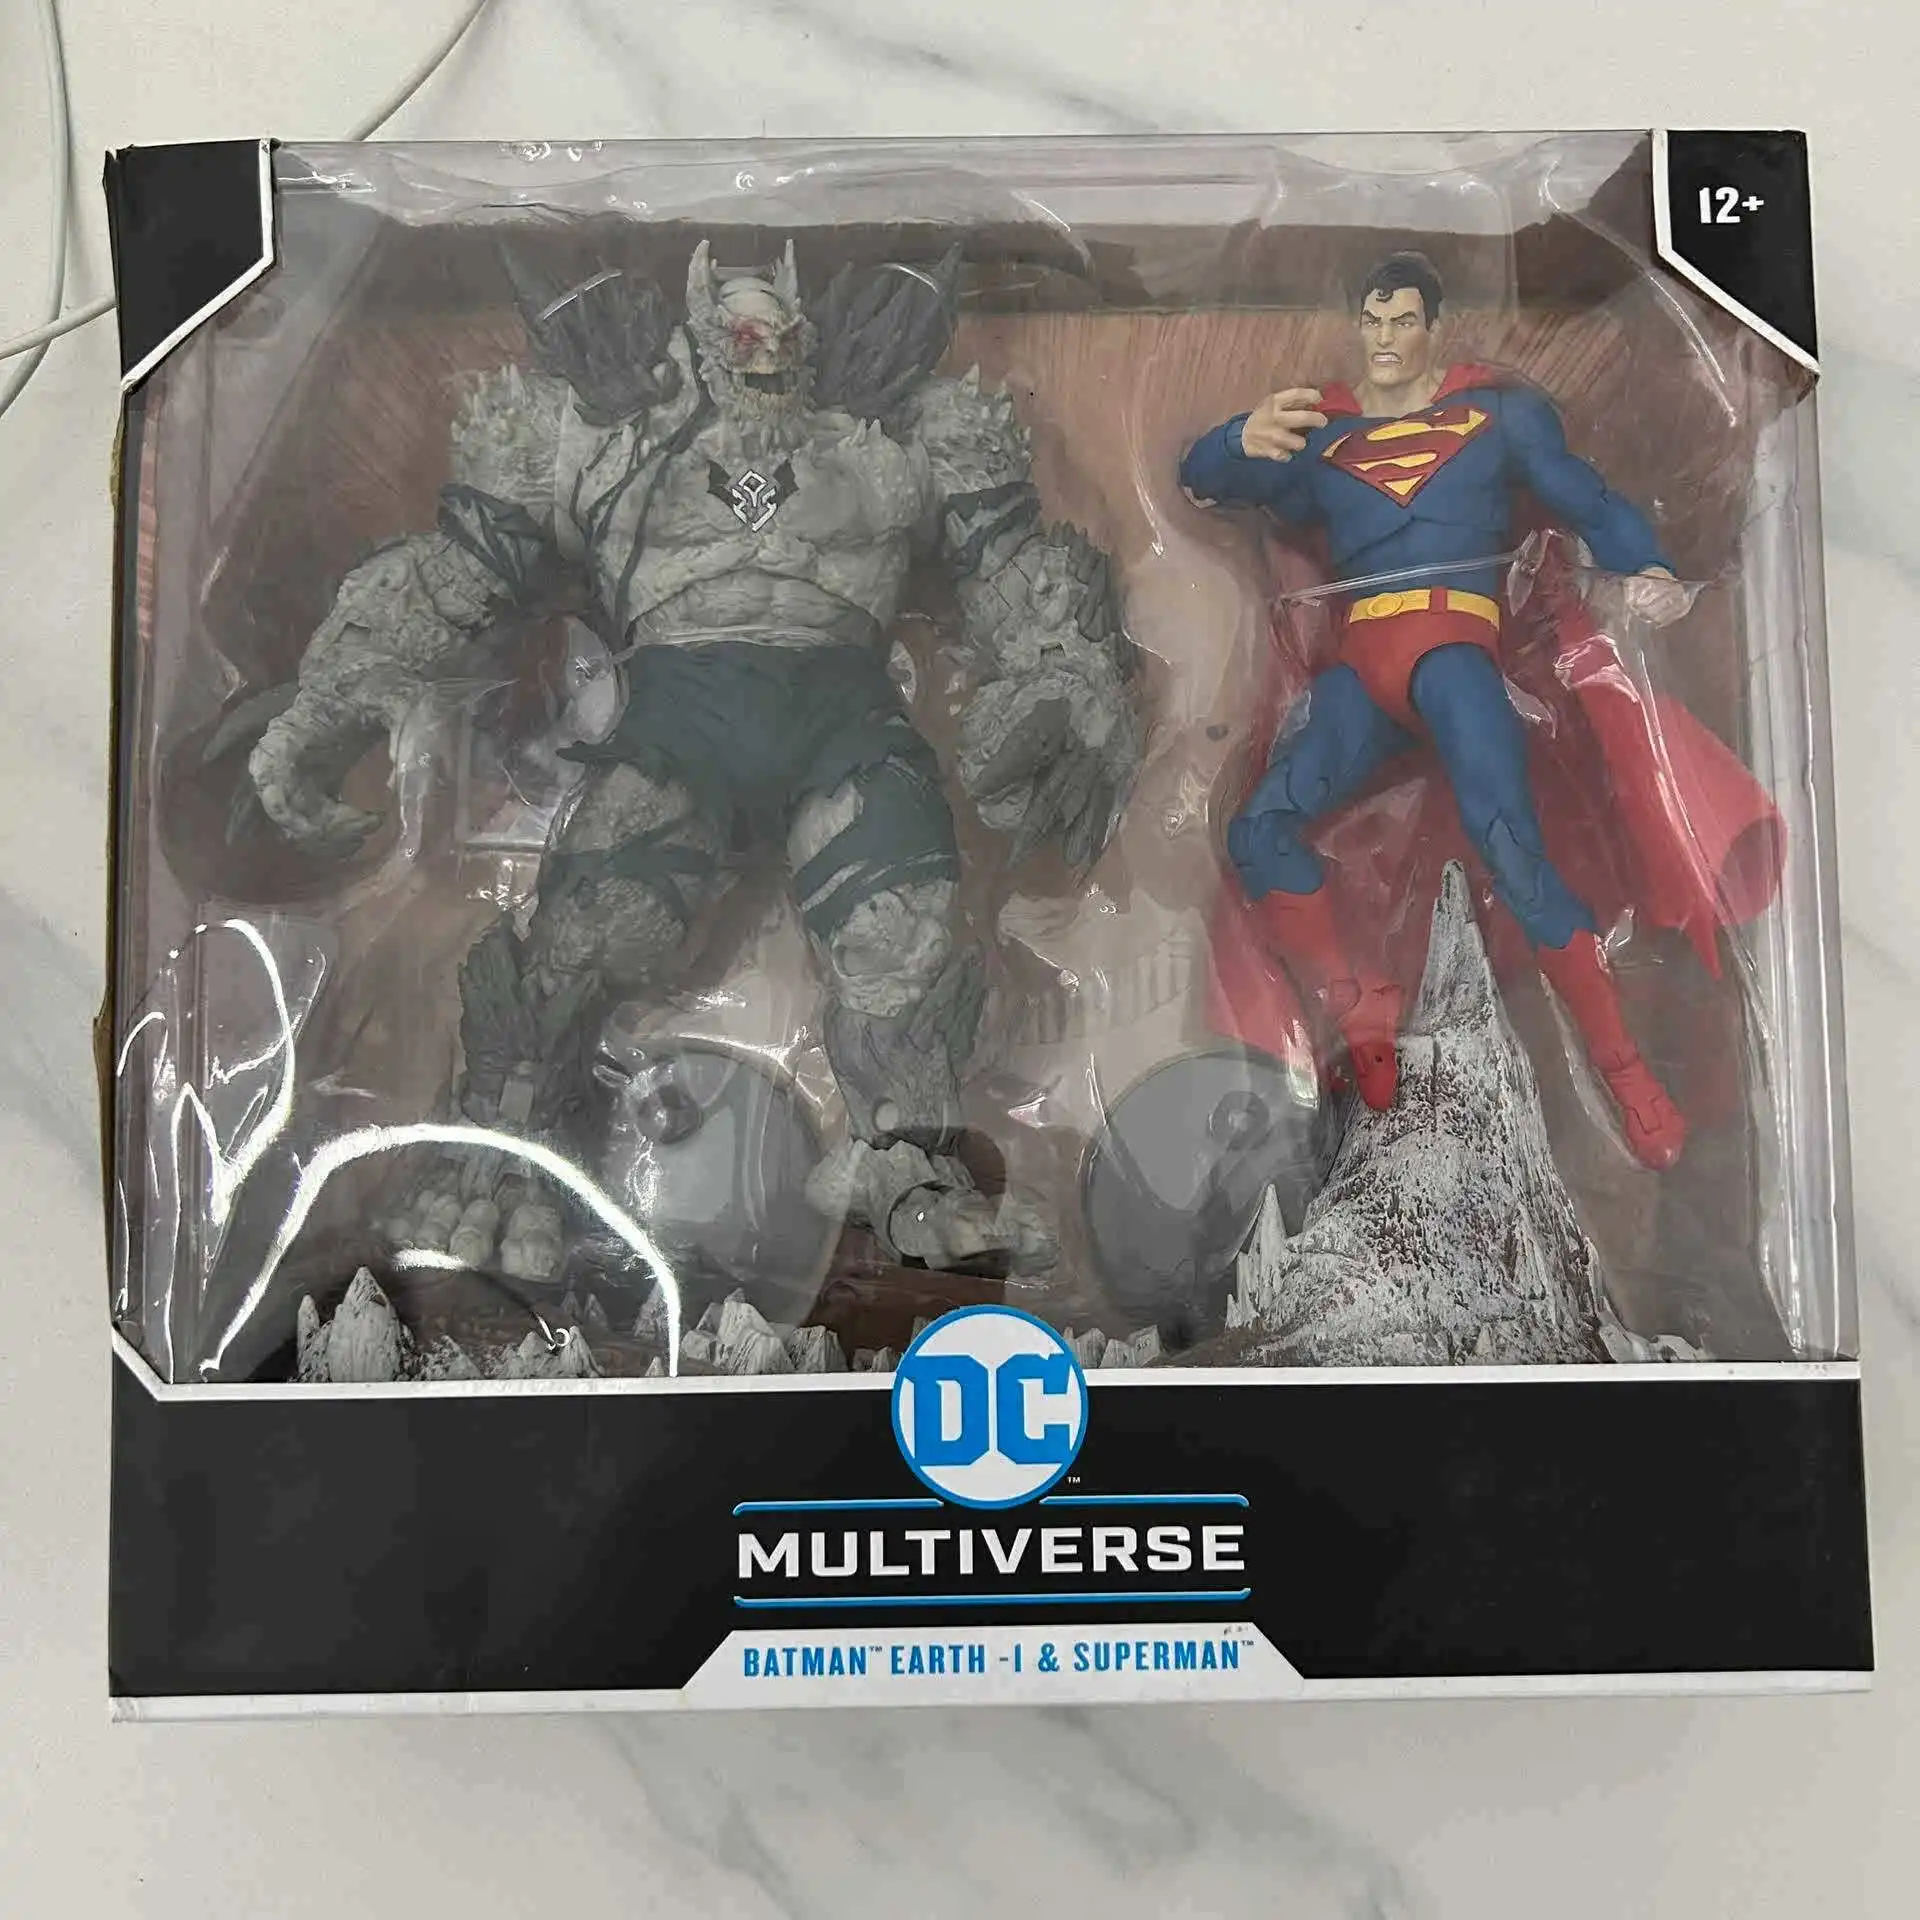 

Original Mcfarlane Dc Superman Vs Doomsady Action Figure 7inch Pvc Anime Figurine gold Collection Model Statue Toys Gifts